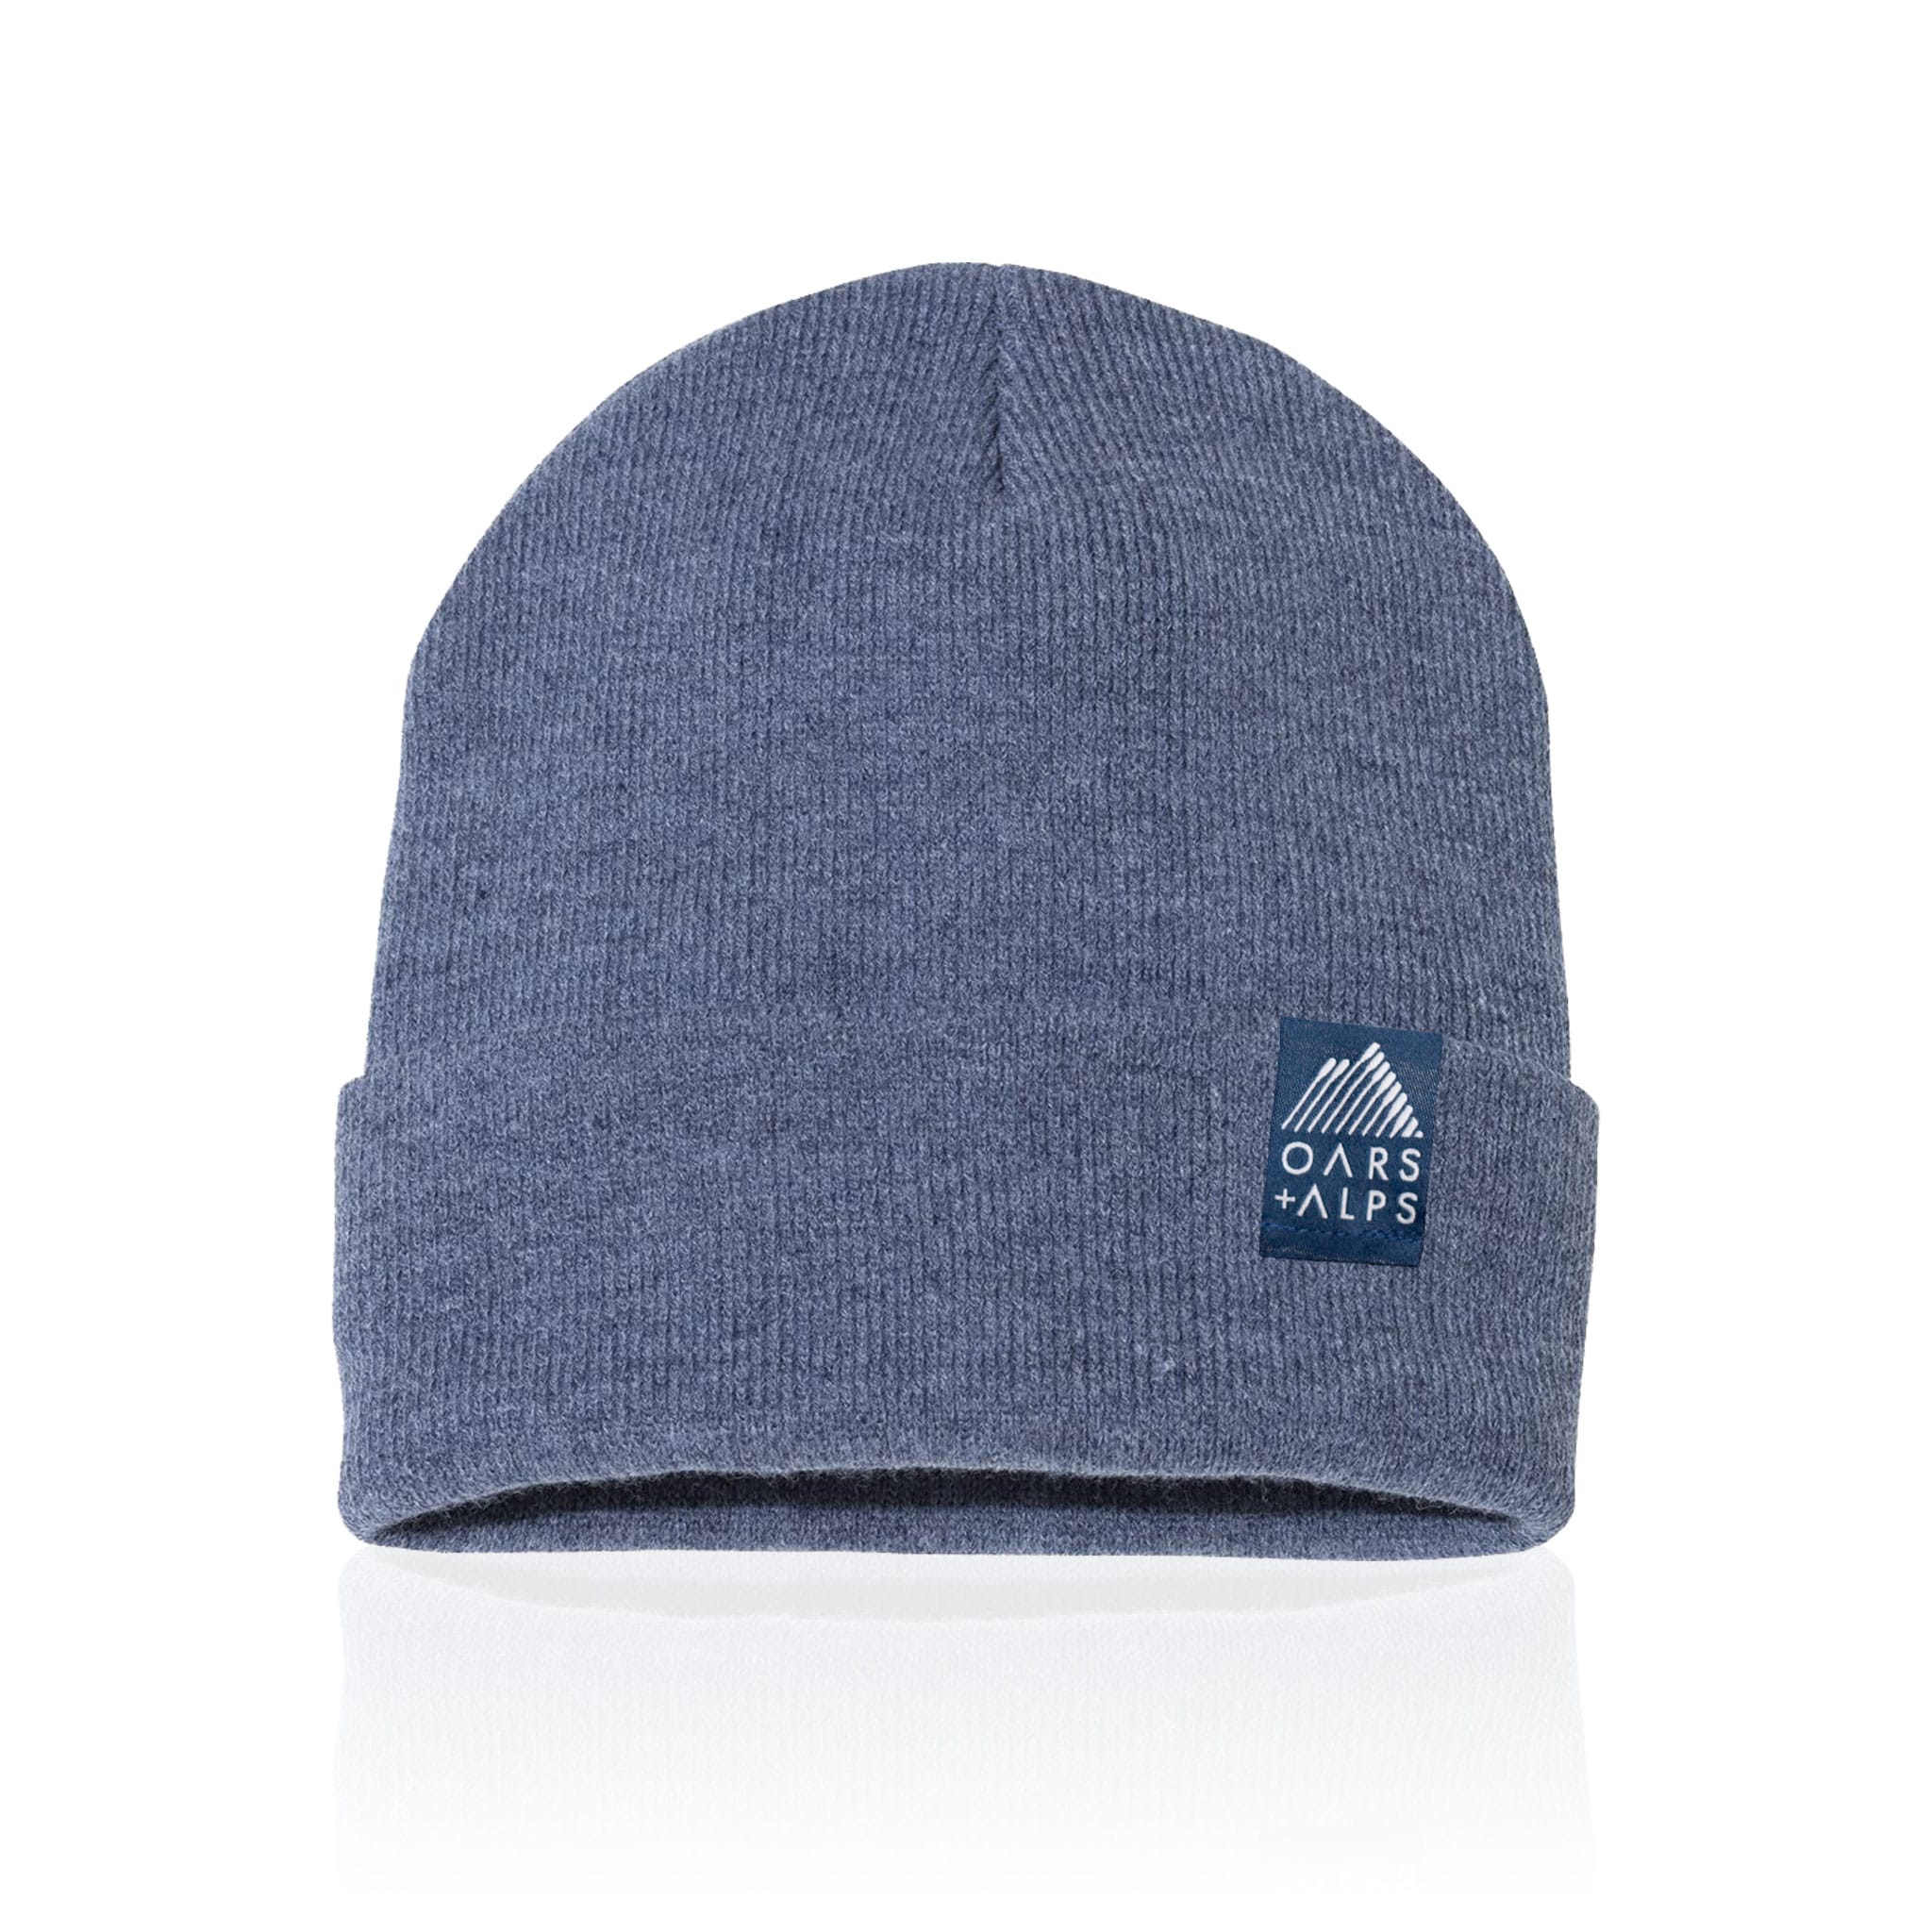 oars and alps beanie